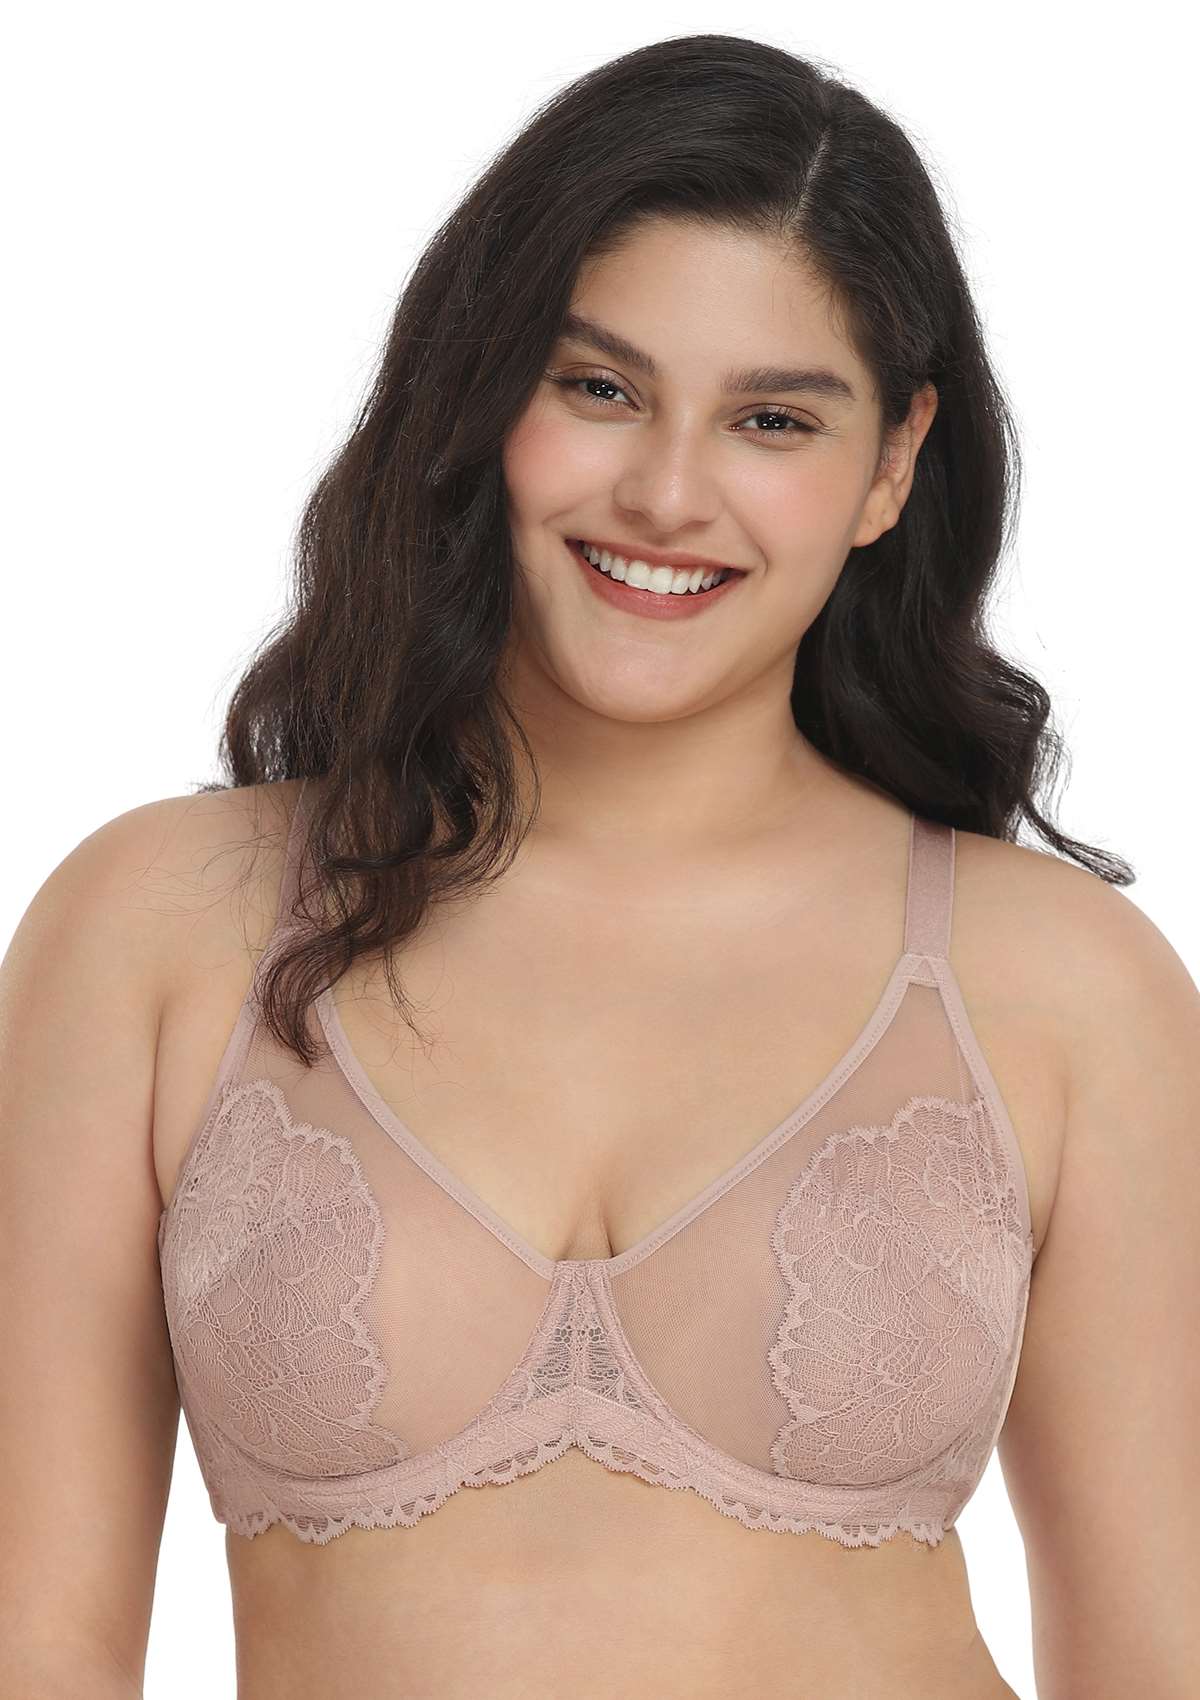 HSIA Blossom Lace Bra And Panties Set: Best Bra For Large Busts - Dark Pink / 44 / DD/E